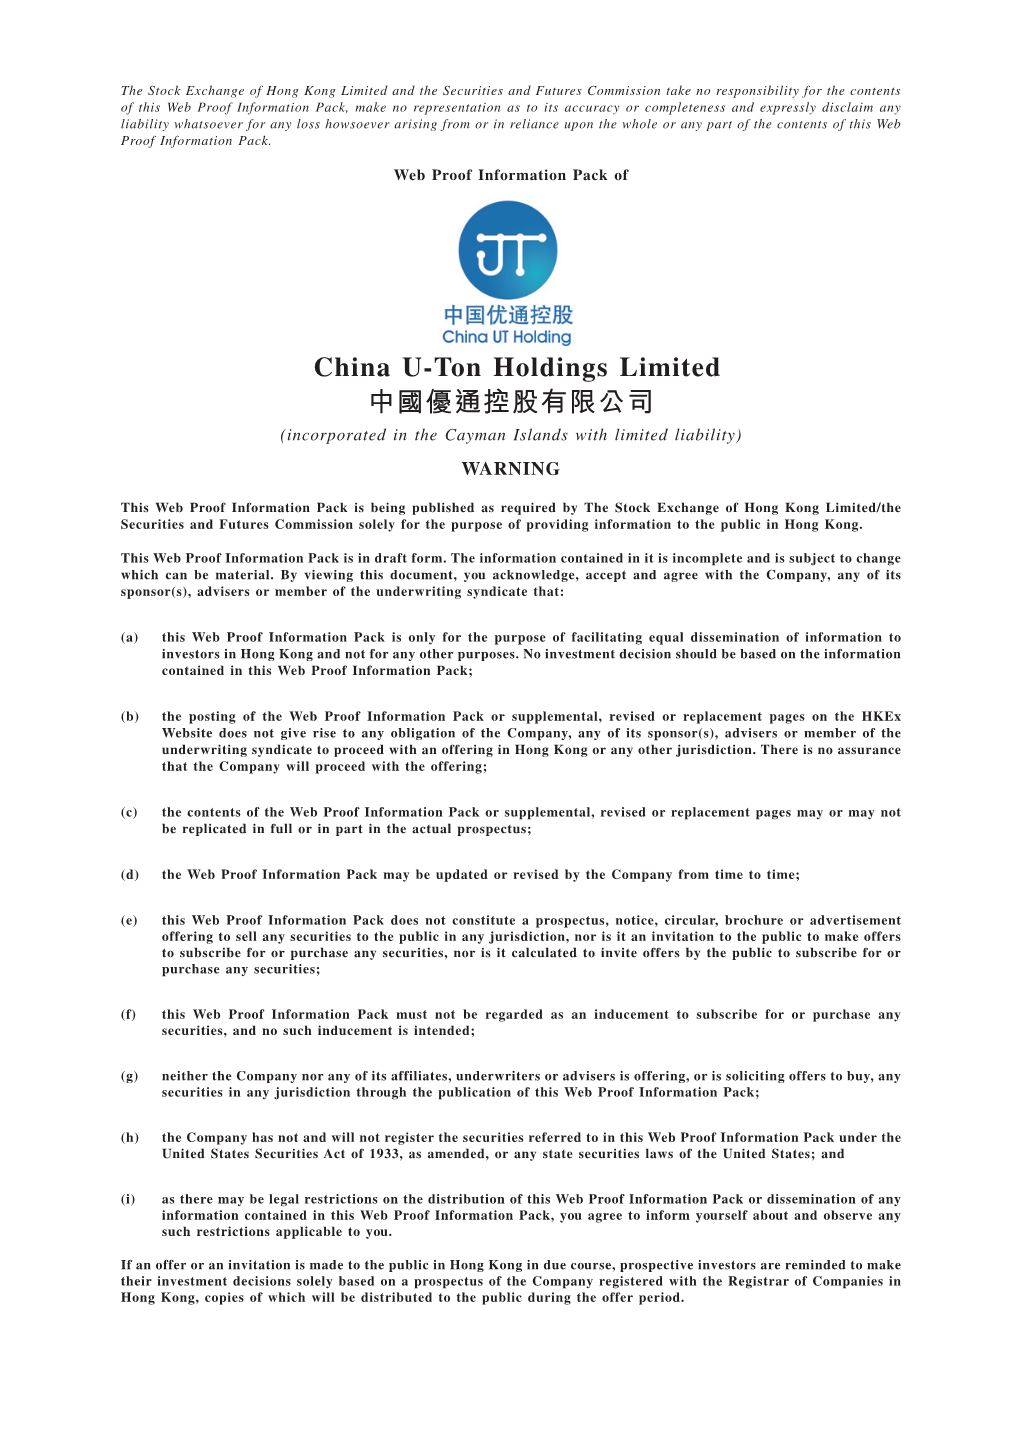 China U-Ton Holdings Limited 中國優通控股有限公司 (Incorporated in the Cayman Islands with Limited Liability) WARNING